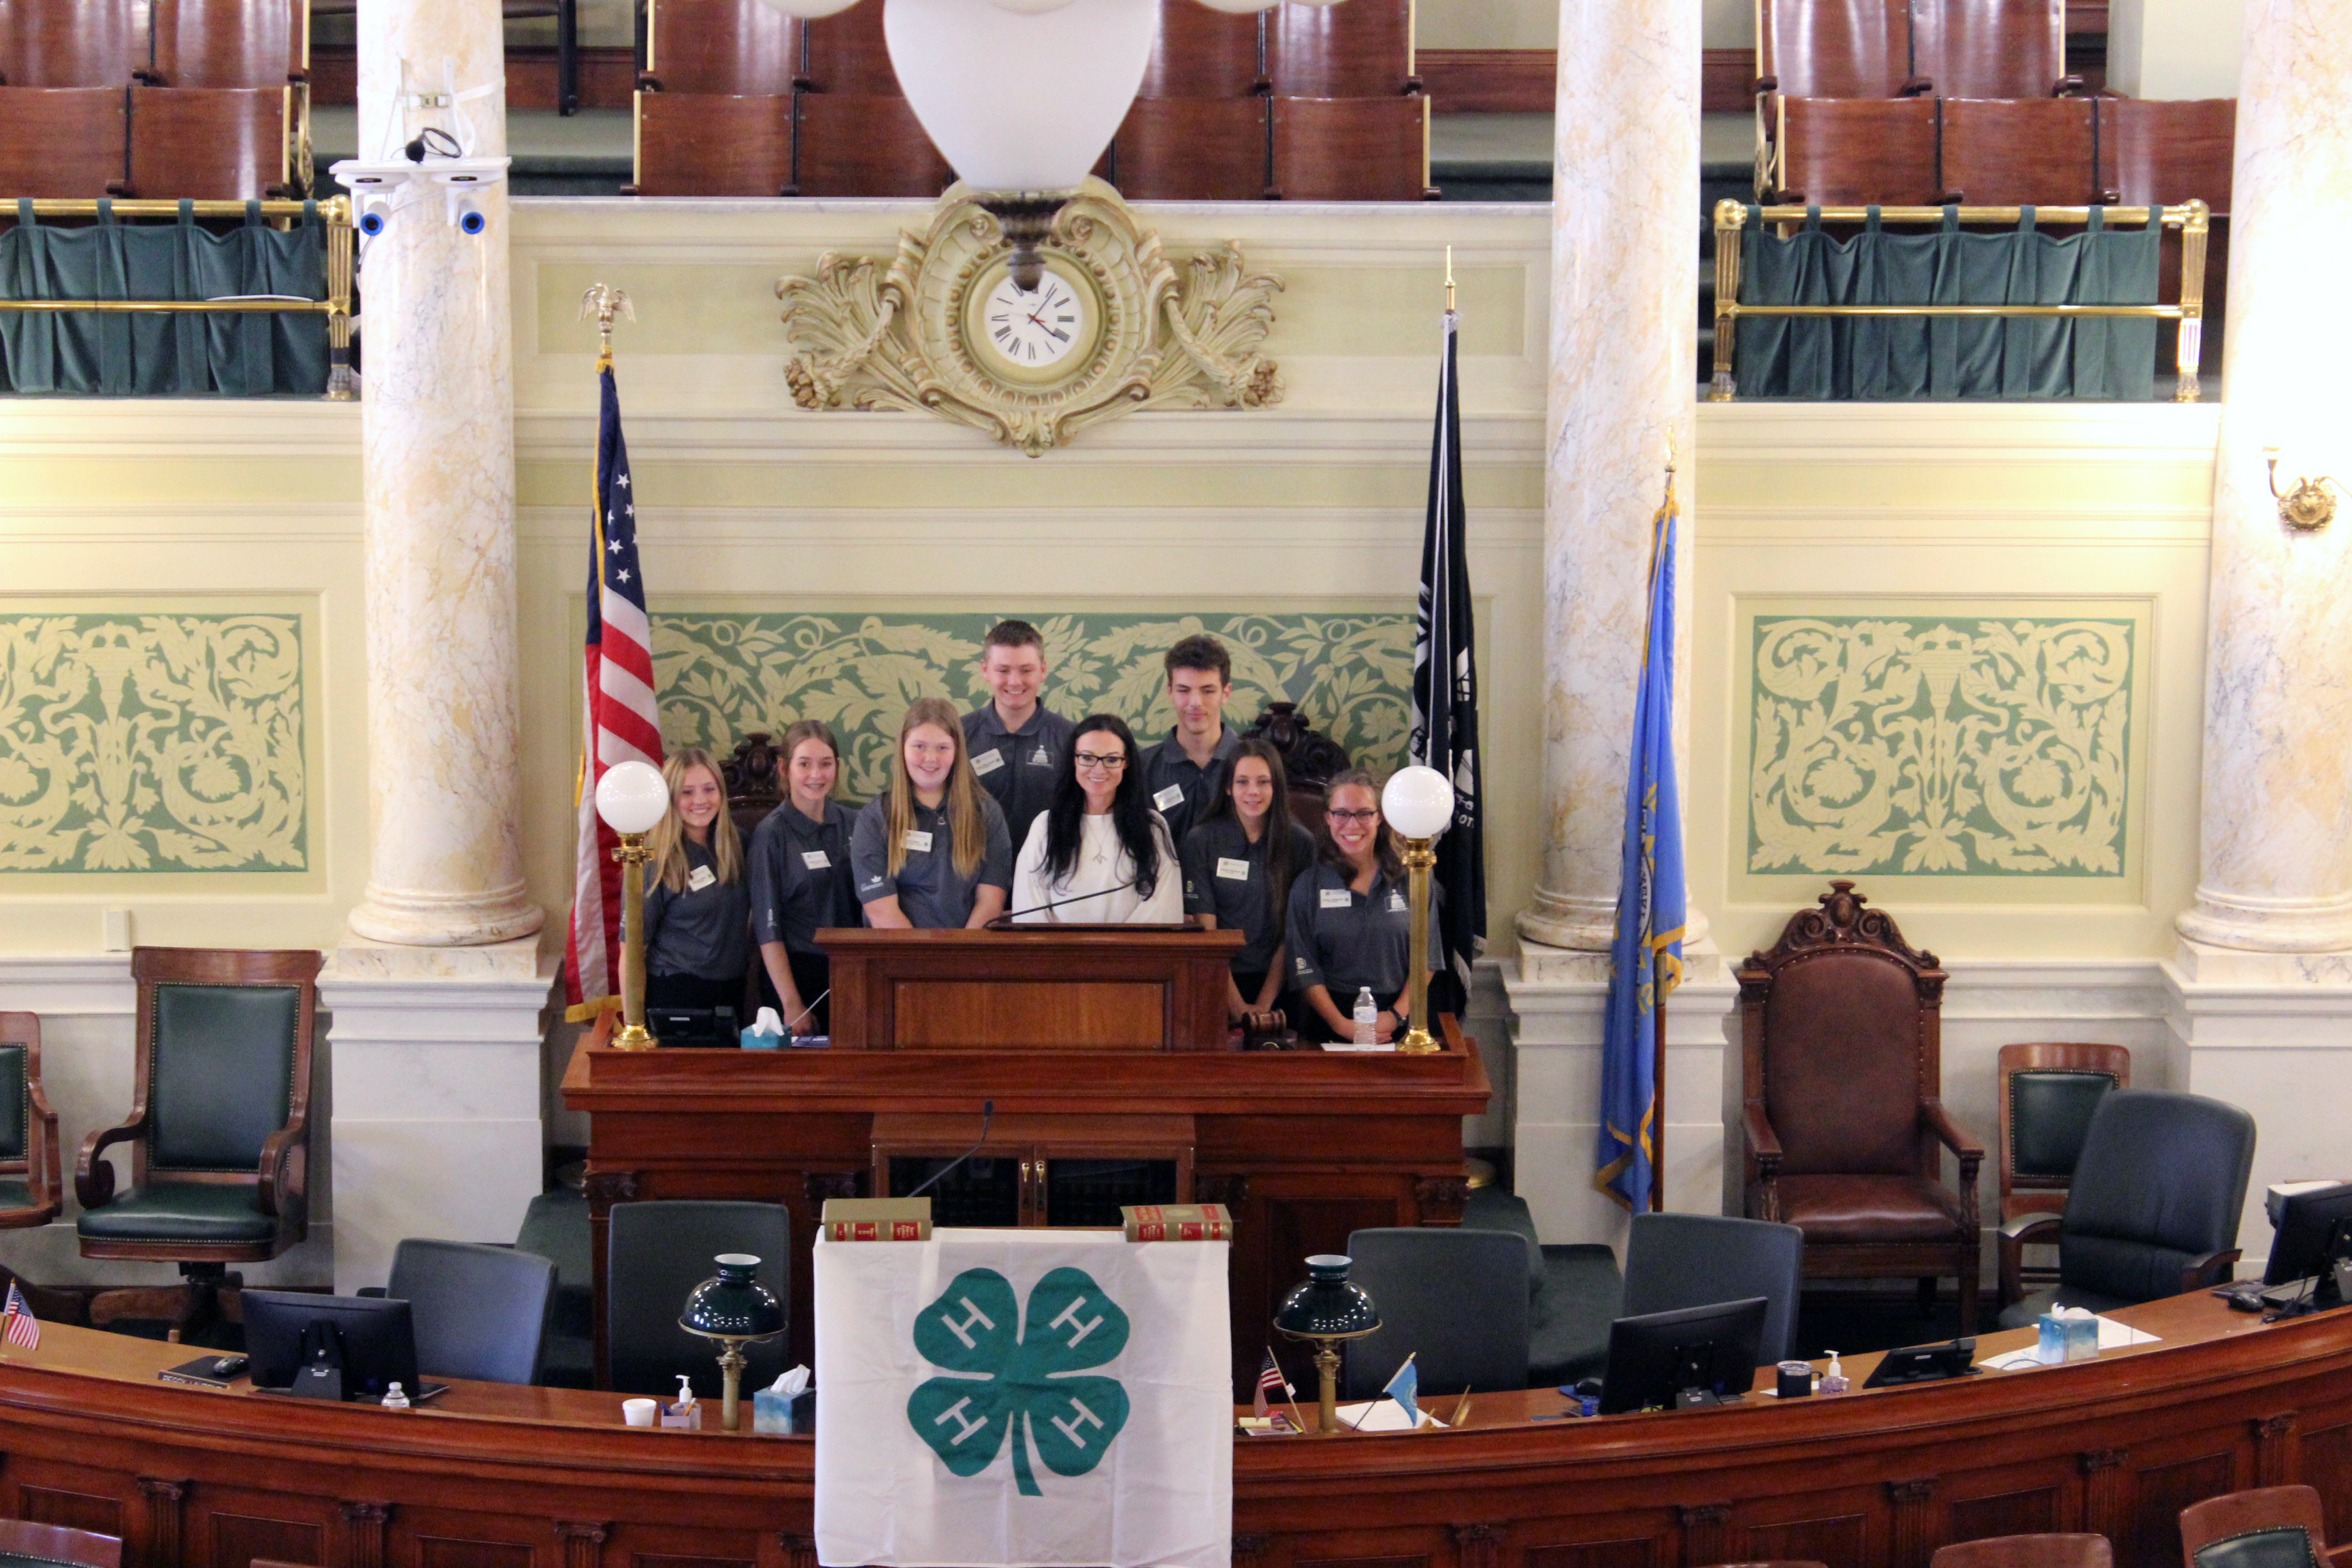 Nine youth stand behind a podium inside the South Dakota Capitol session chamber. A 4-H flag is draped in front.